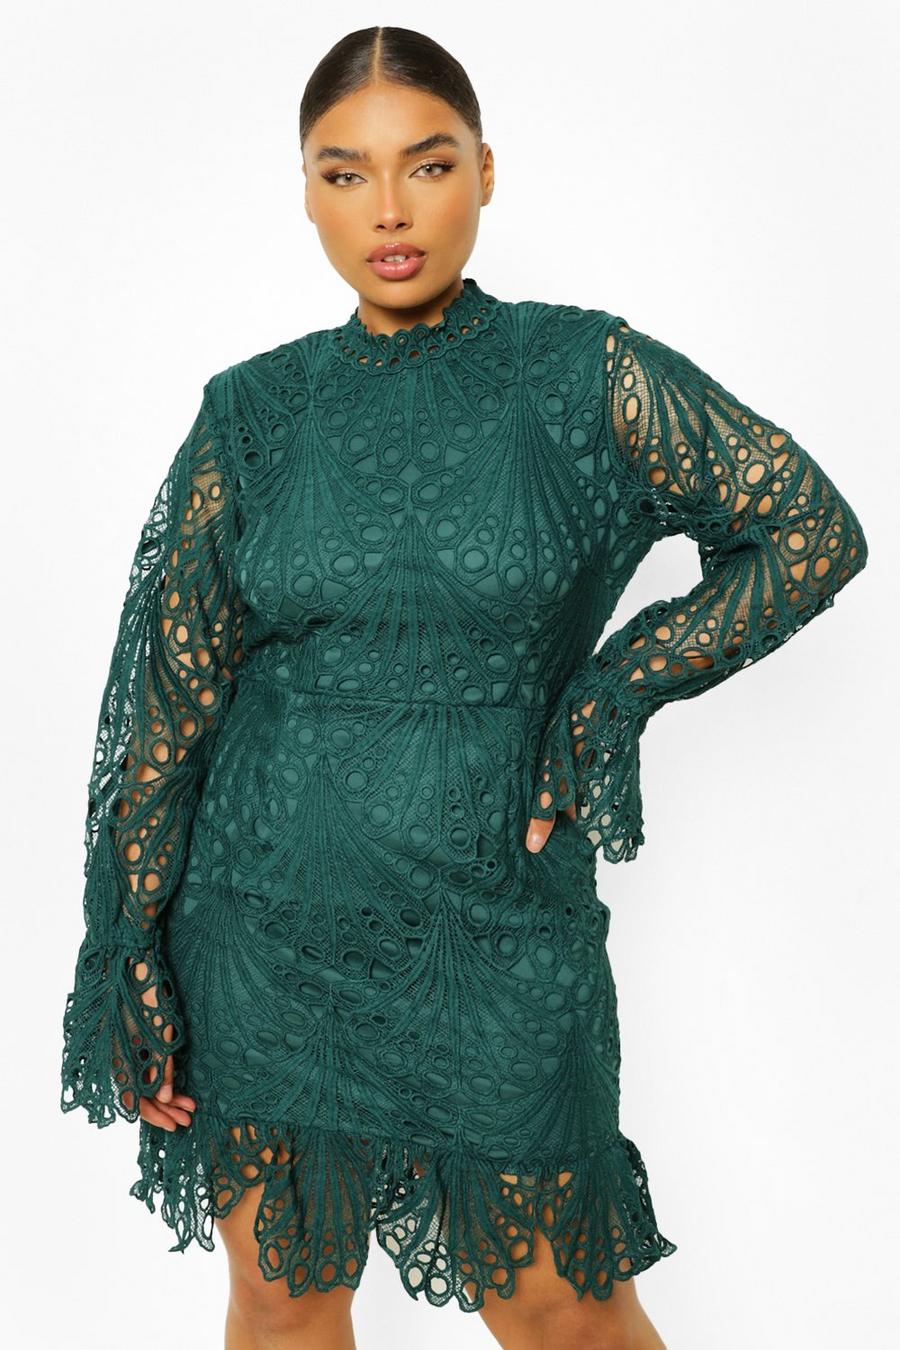 All Yours Emerald Green Lace Long Sleeve Ruffled Mini Dress